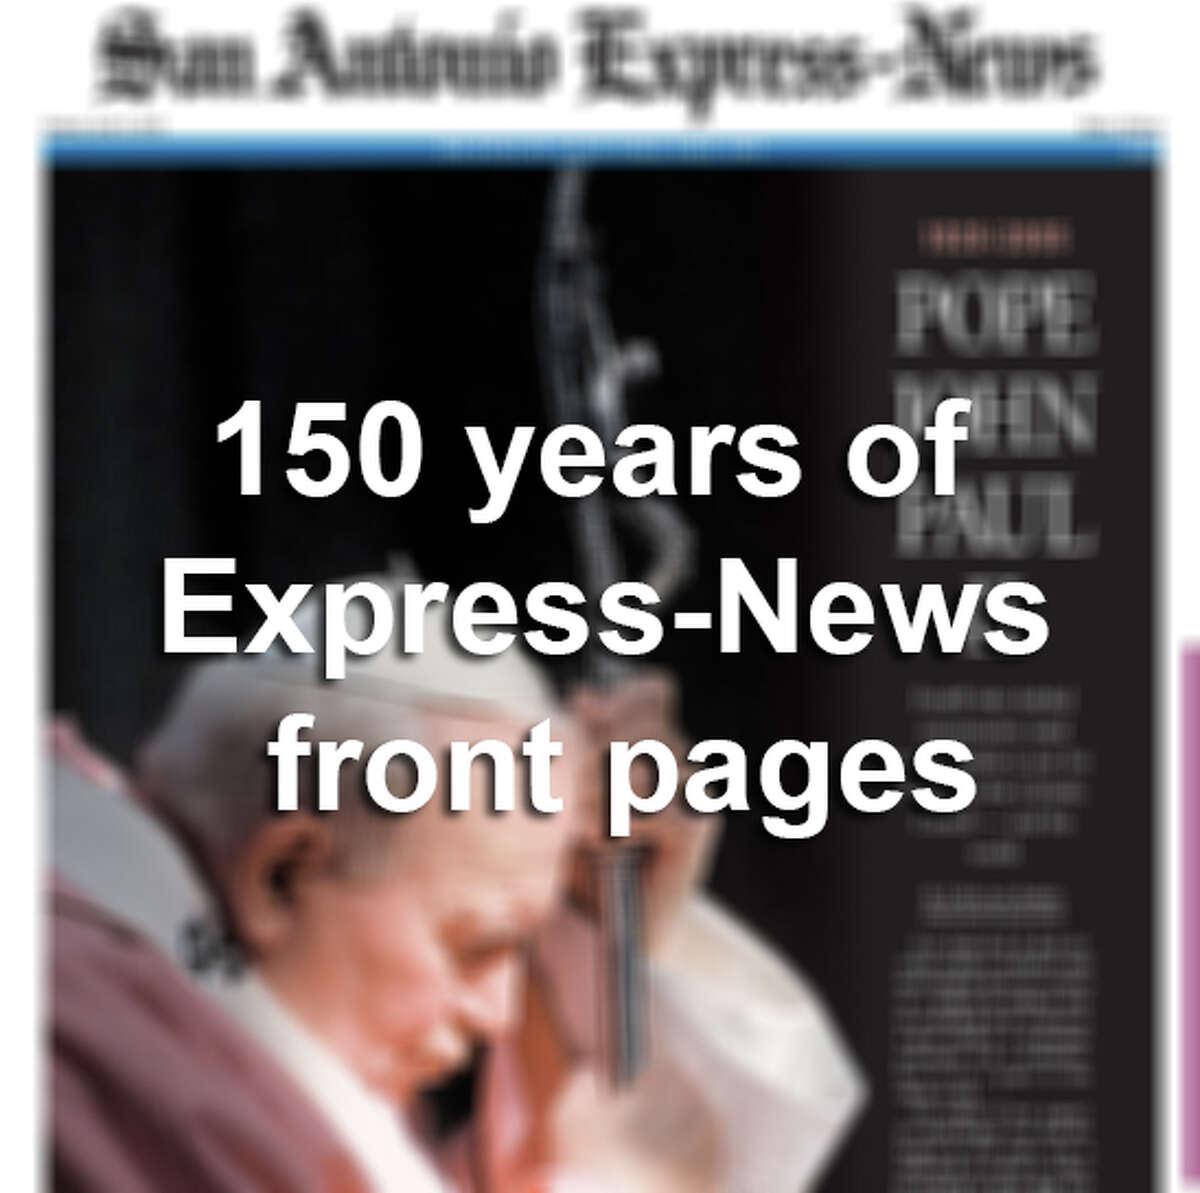 150 years of Express-News front pages.